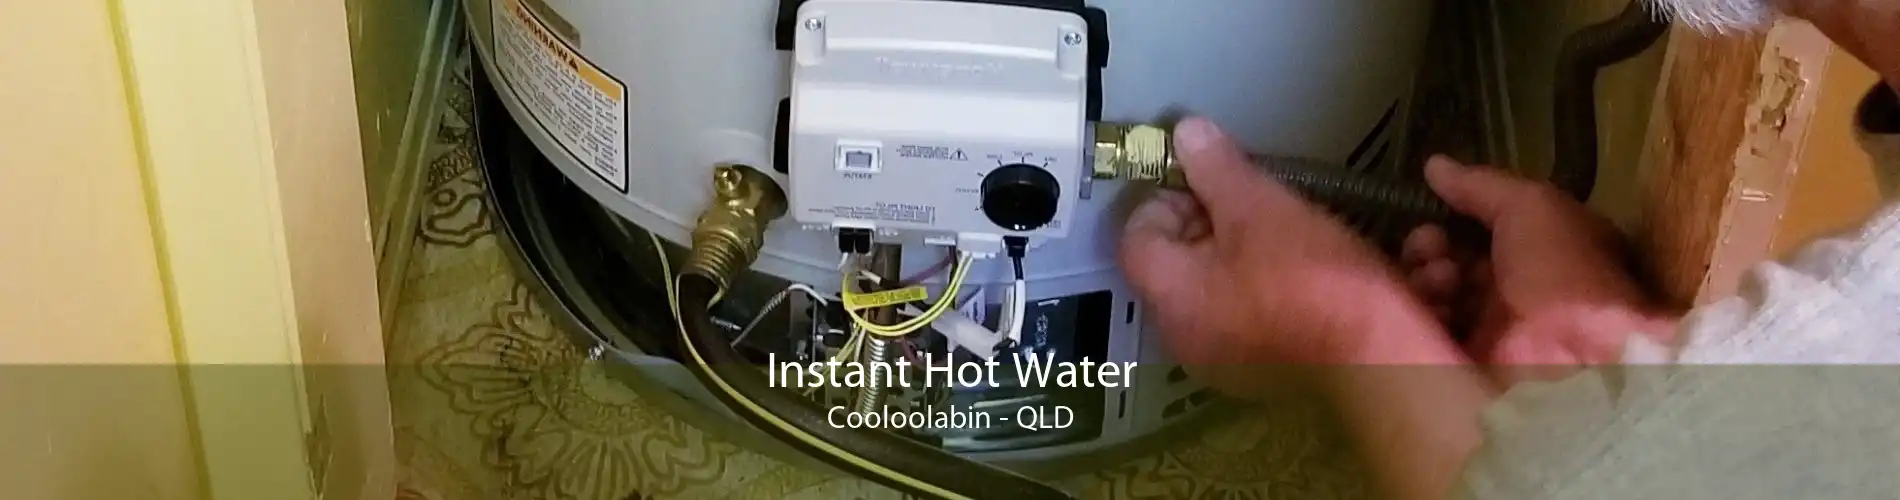 Instant Hot Water Cooloolabin - QLD